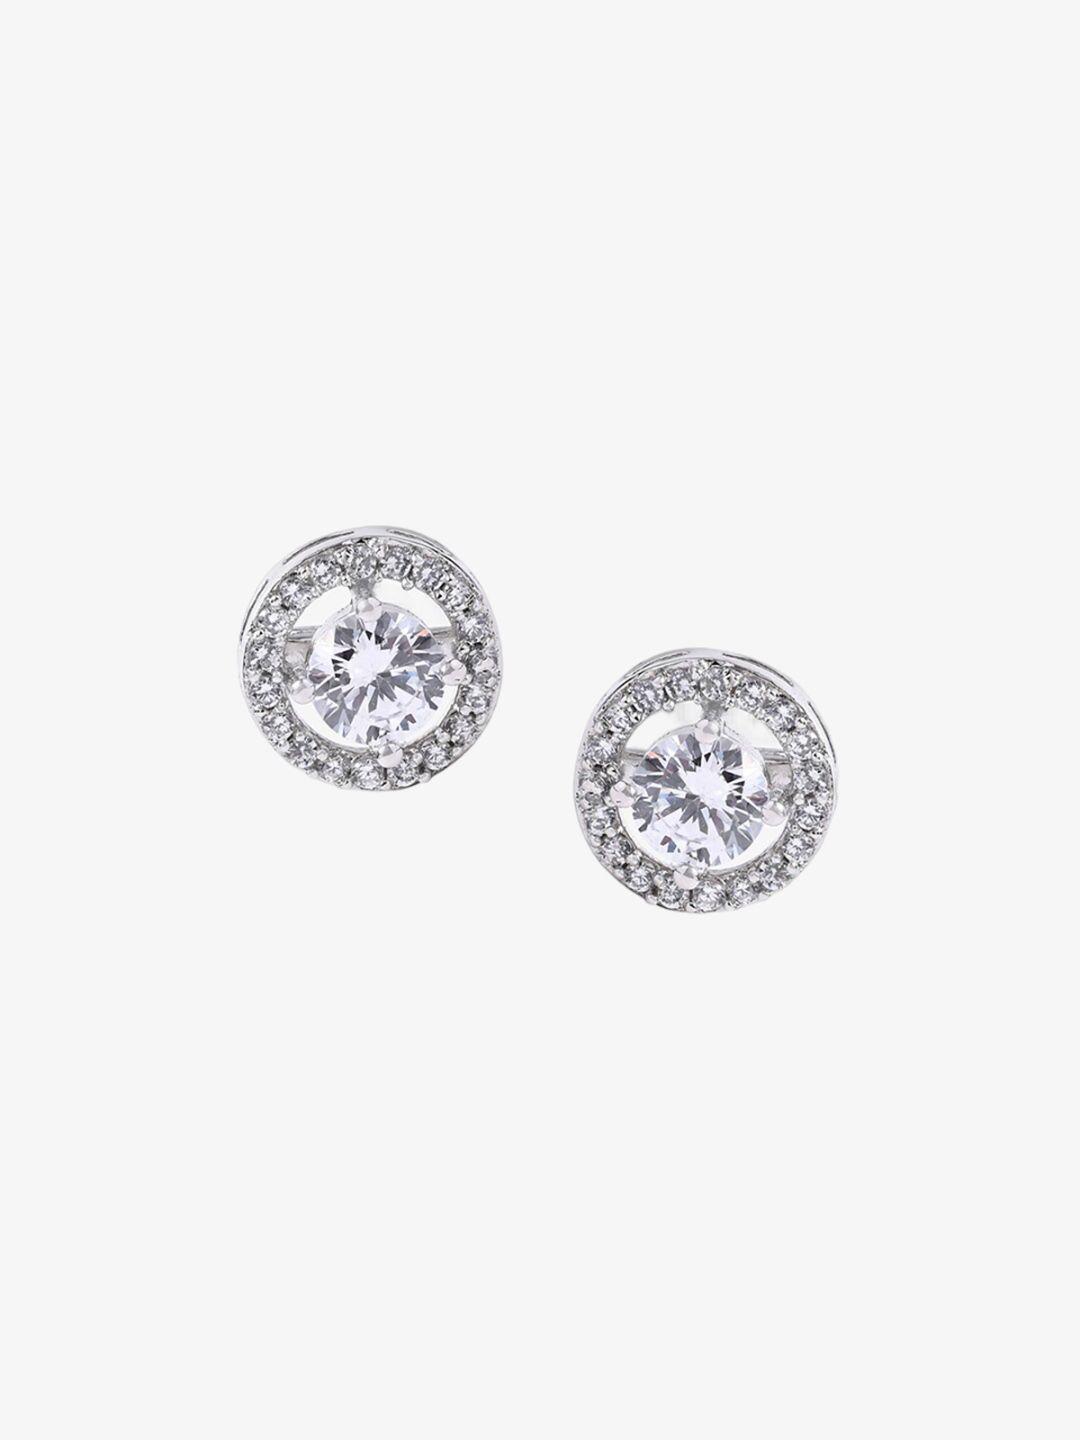 mikoto by fablestreet silver-toned classic studs earrings